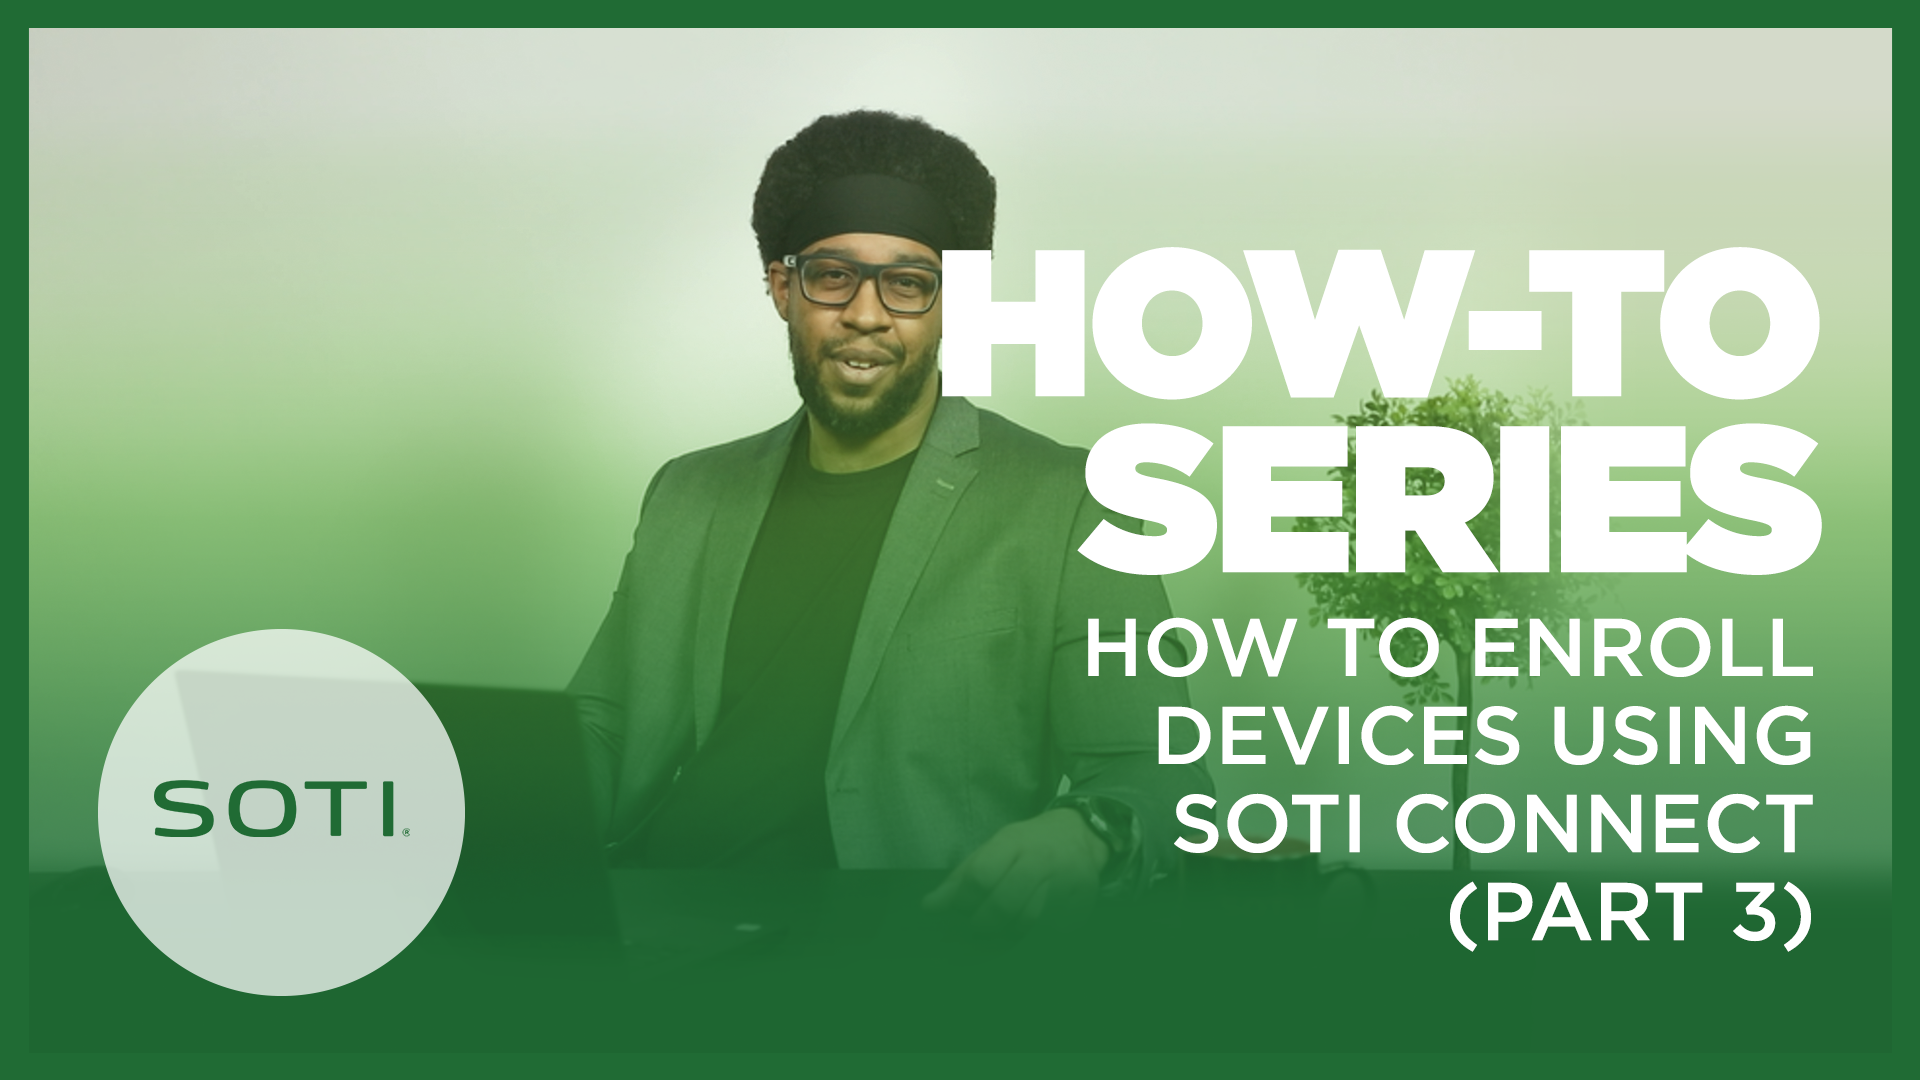 How-To: Enroll Devices Using SOTI Connect (Part 3)